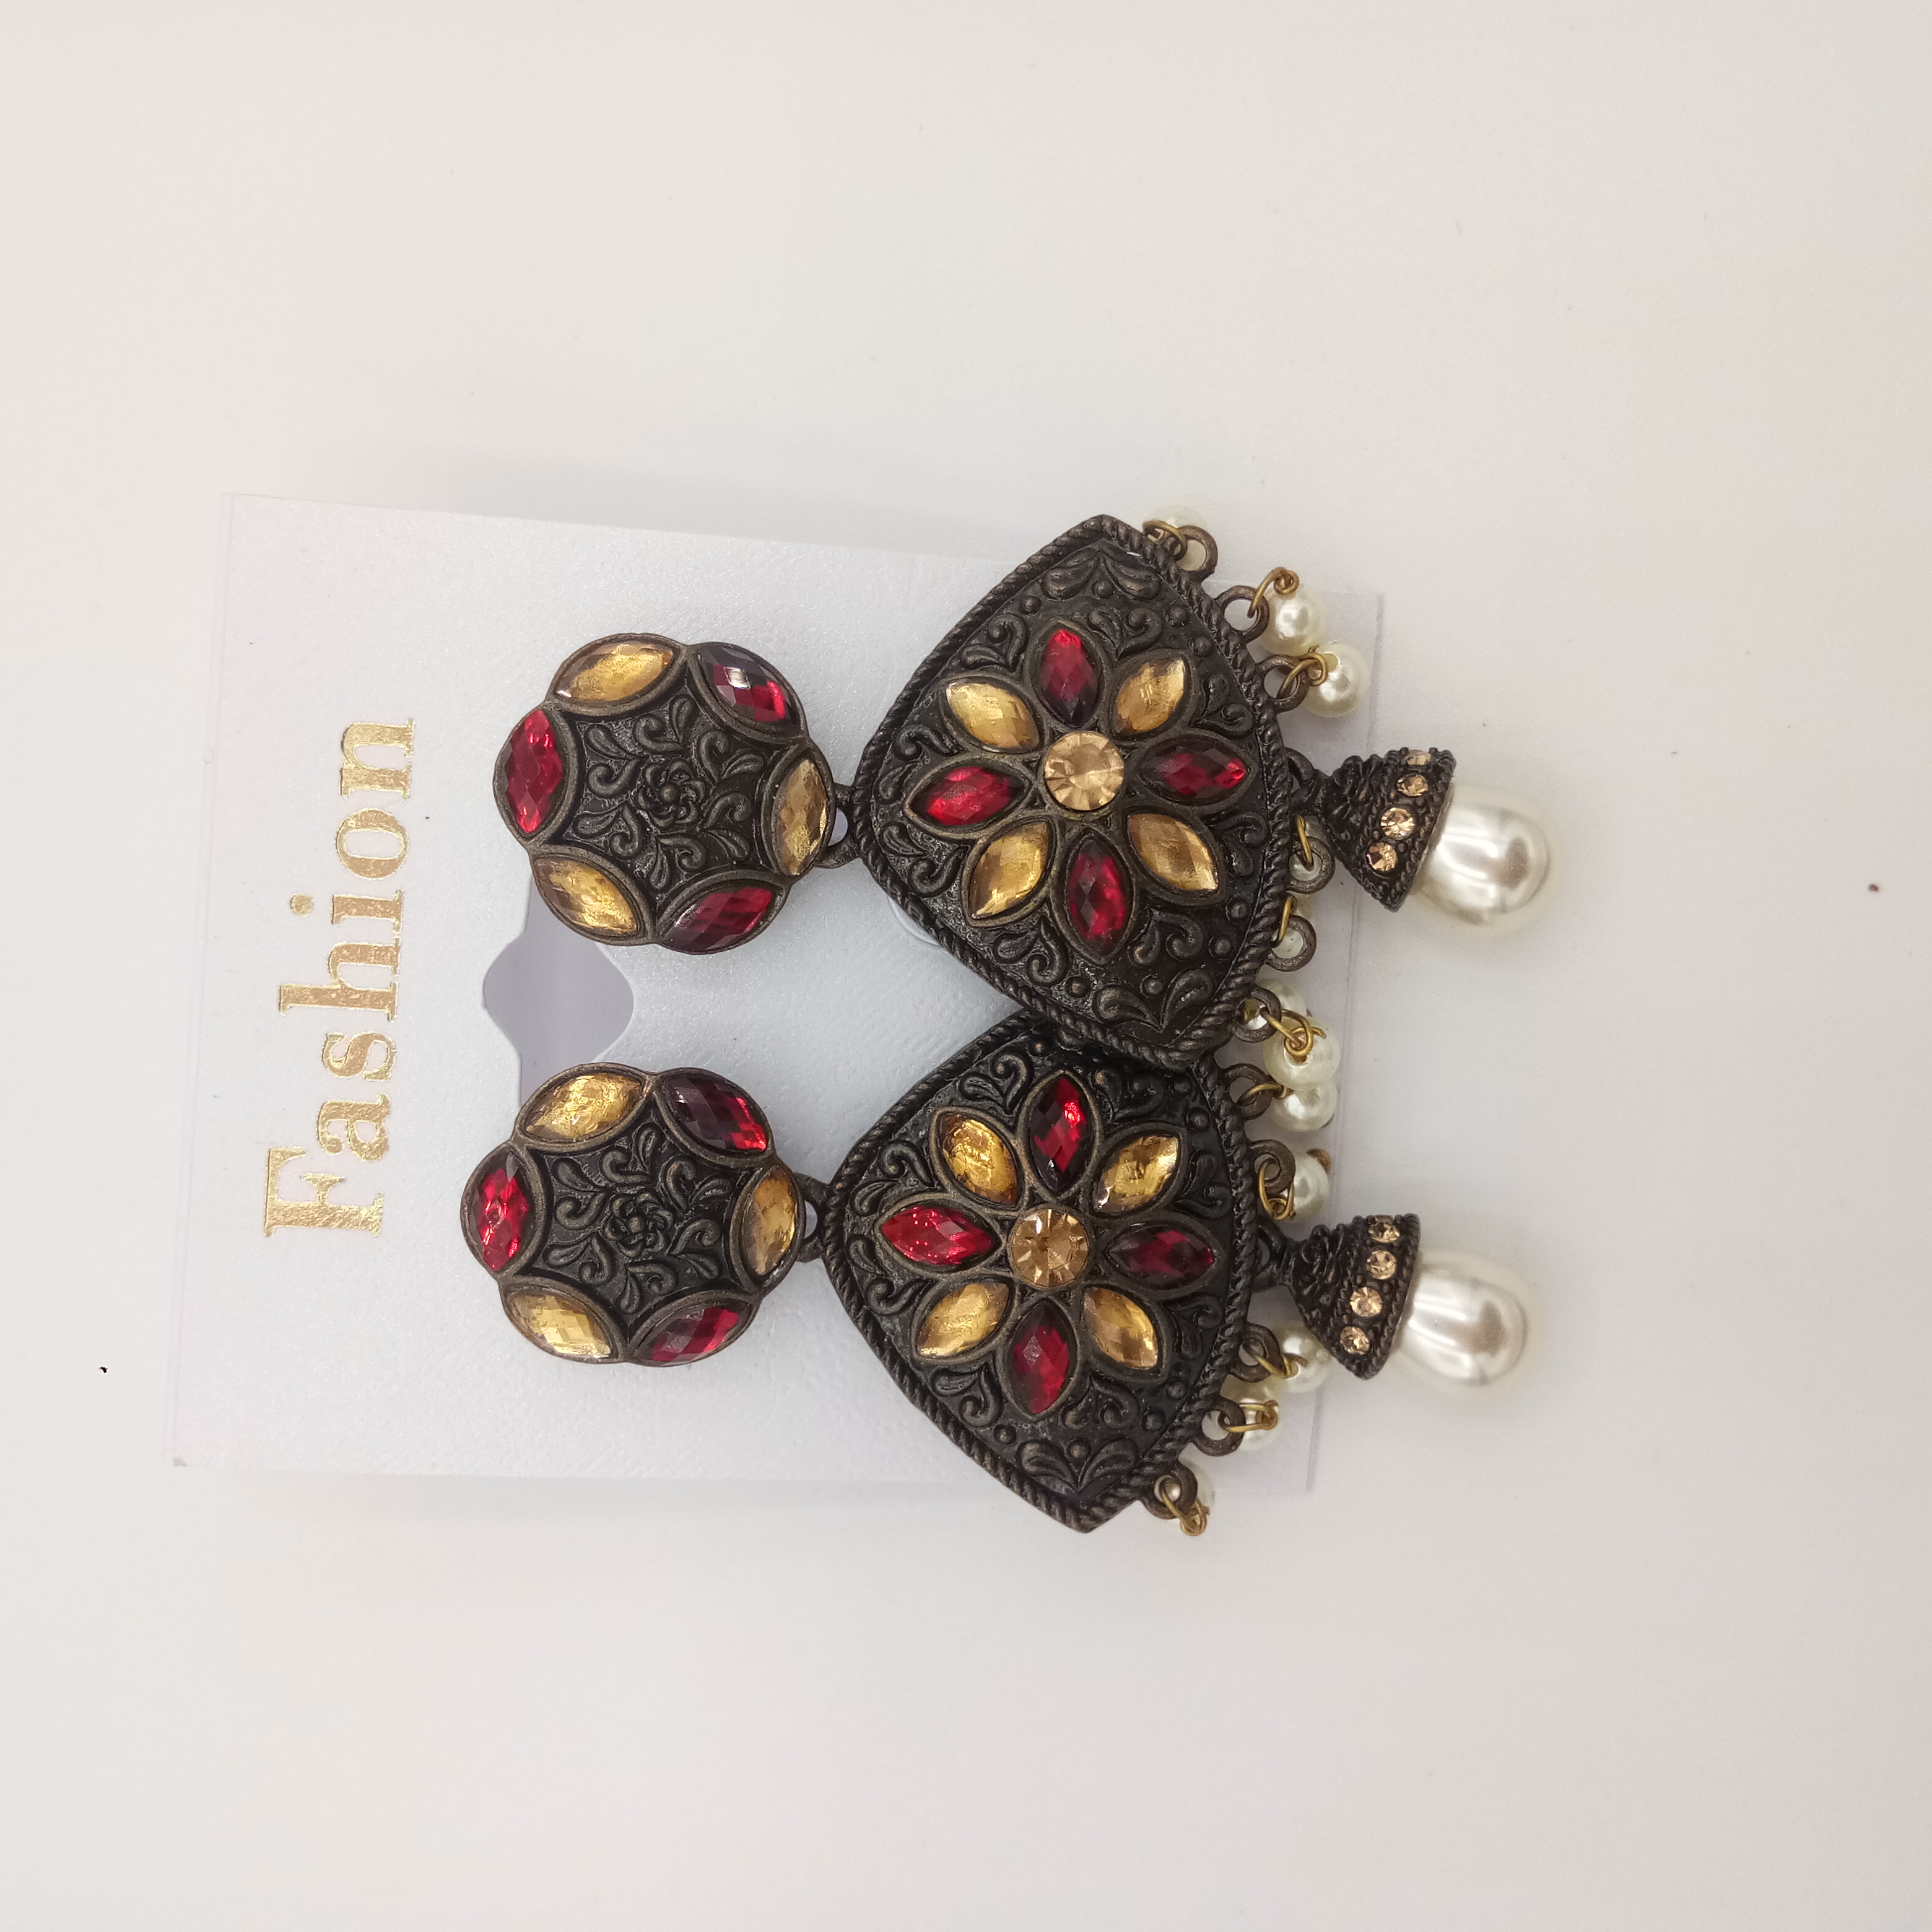 NEW ANTIQUE LCT STN EARRINGS - 521016